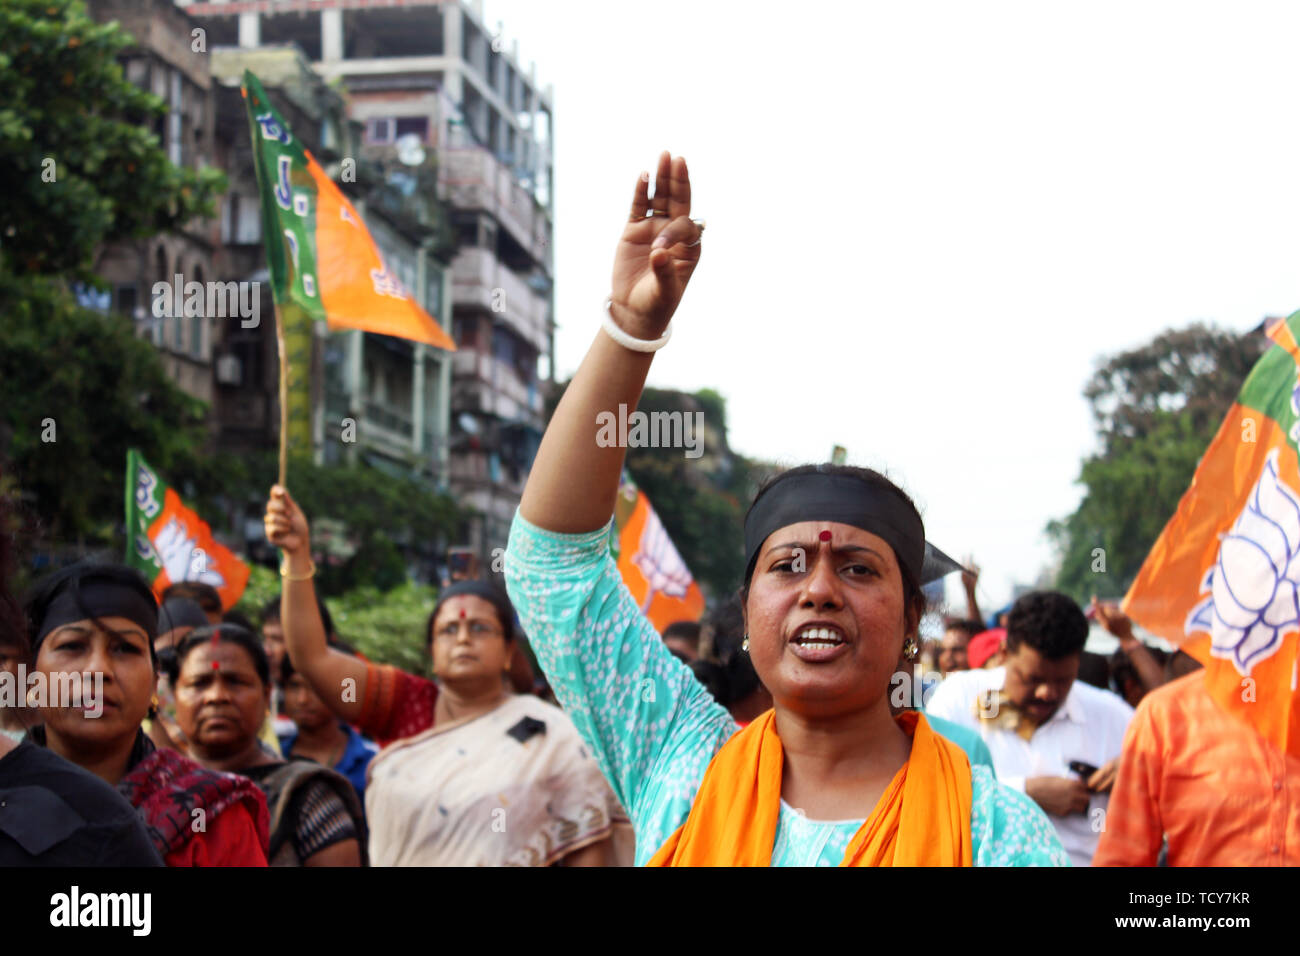 BJP Female worker chants slogans while making a gesture during the protest in Kolkata. At least four people were killed and three others severely injured in the clashes that broke out between All India Trinamool Congress and Bhartiya Janata Party supporters in Basirhat Area in North 24 Parganas district on Saturday night. It is claimed that the clashes broke out over removing flags of the political parties. State BJP general secretary Sayantan Basu said, three BJP Party Workers Sukanta Mondal, Pradip Mondal and Shankar Mondal died in this clash. Stock Photo